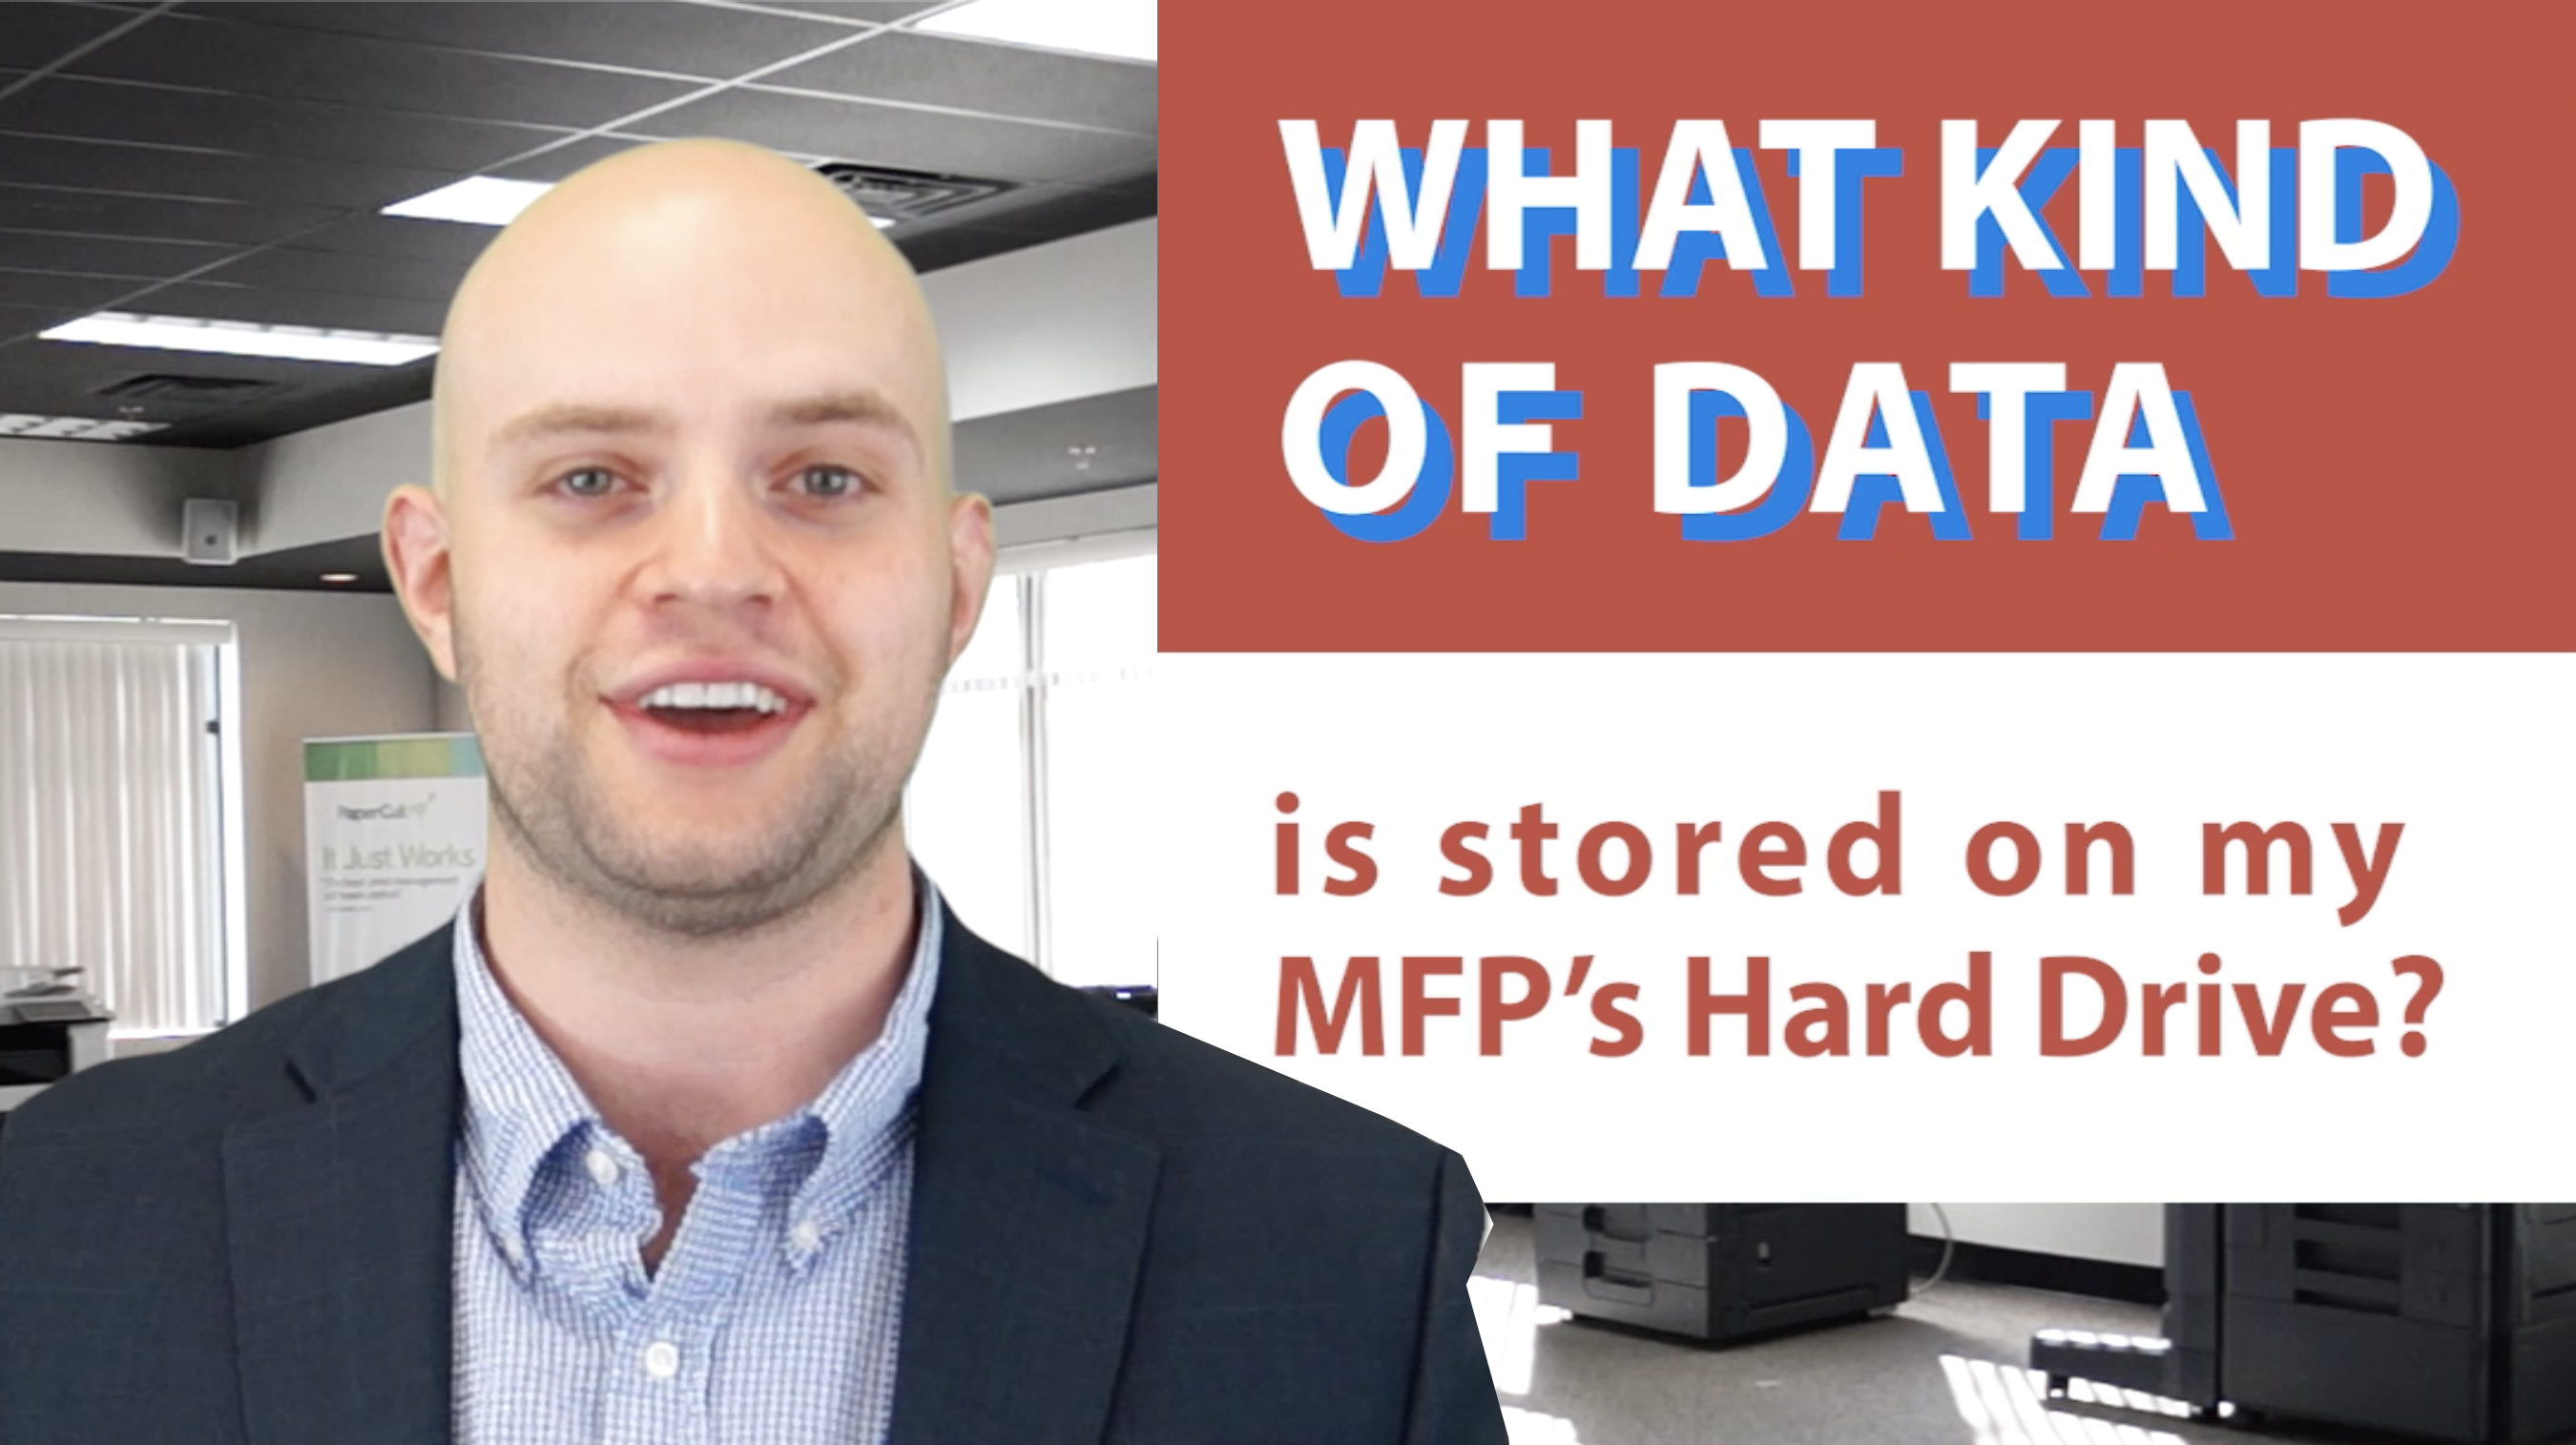 What kind of data is stored on my MFPs hard drive?